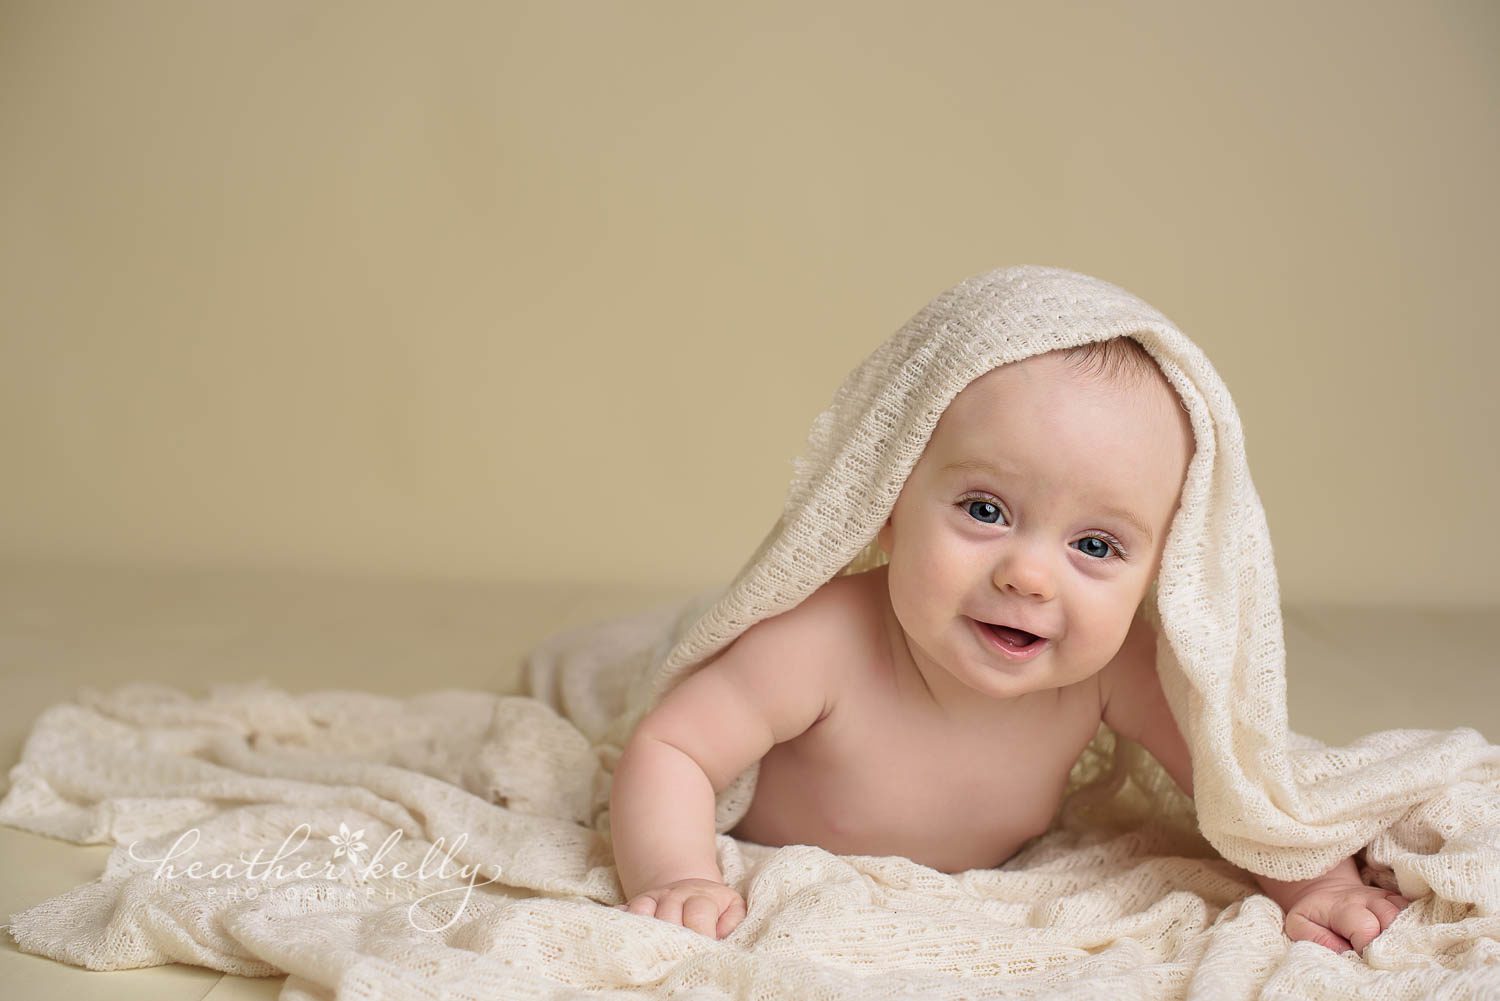 7 month baby boy with cream blanket on his head photo. newtown baby boy by ct photographer heather kelly photography